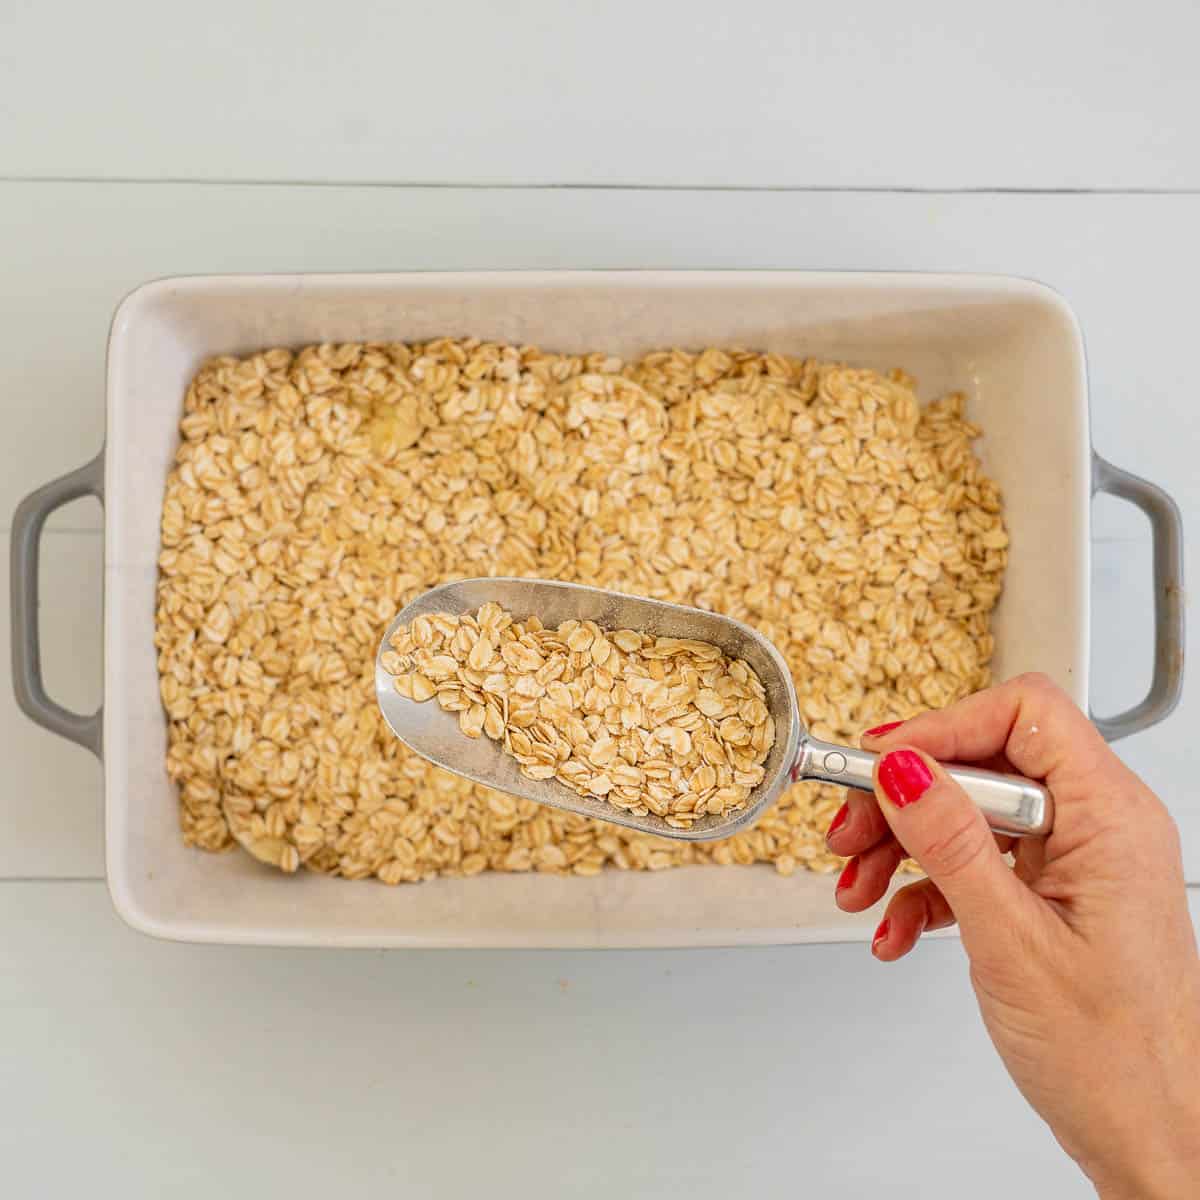 A woman's hand holding a scoop of rolled oats above a rectangular baking dish.